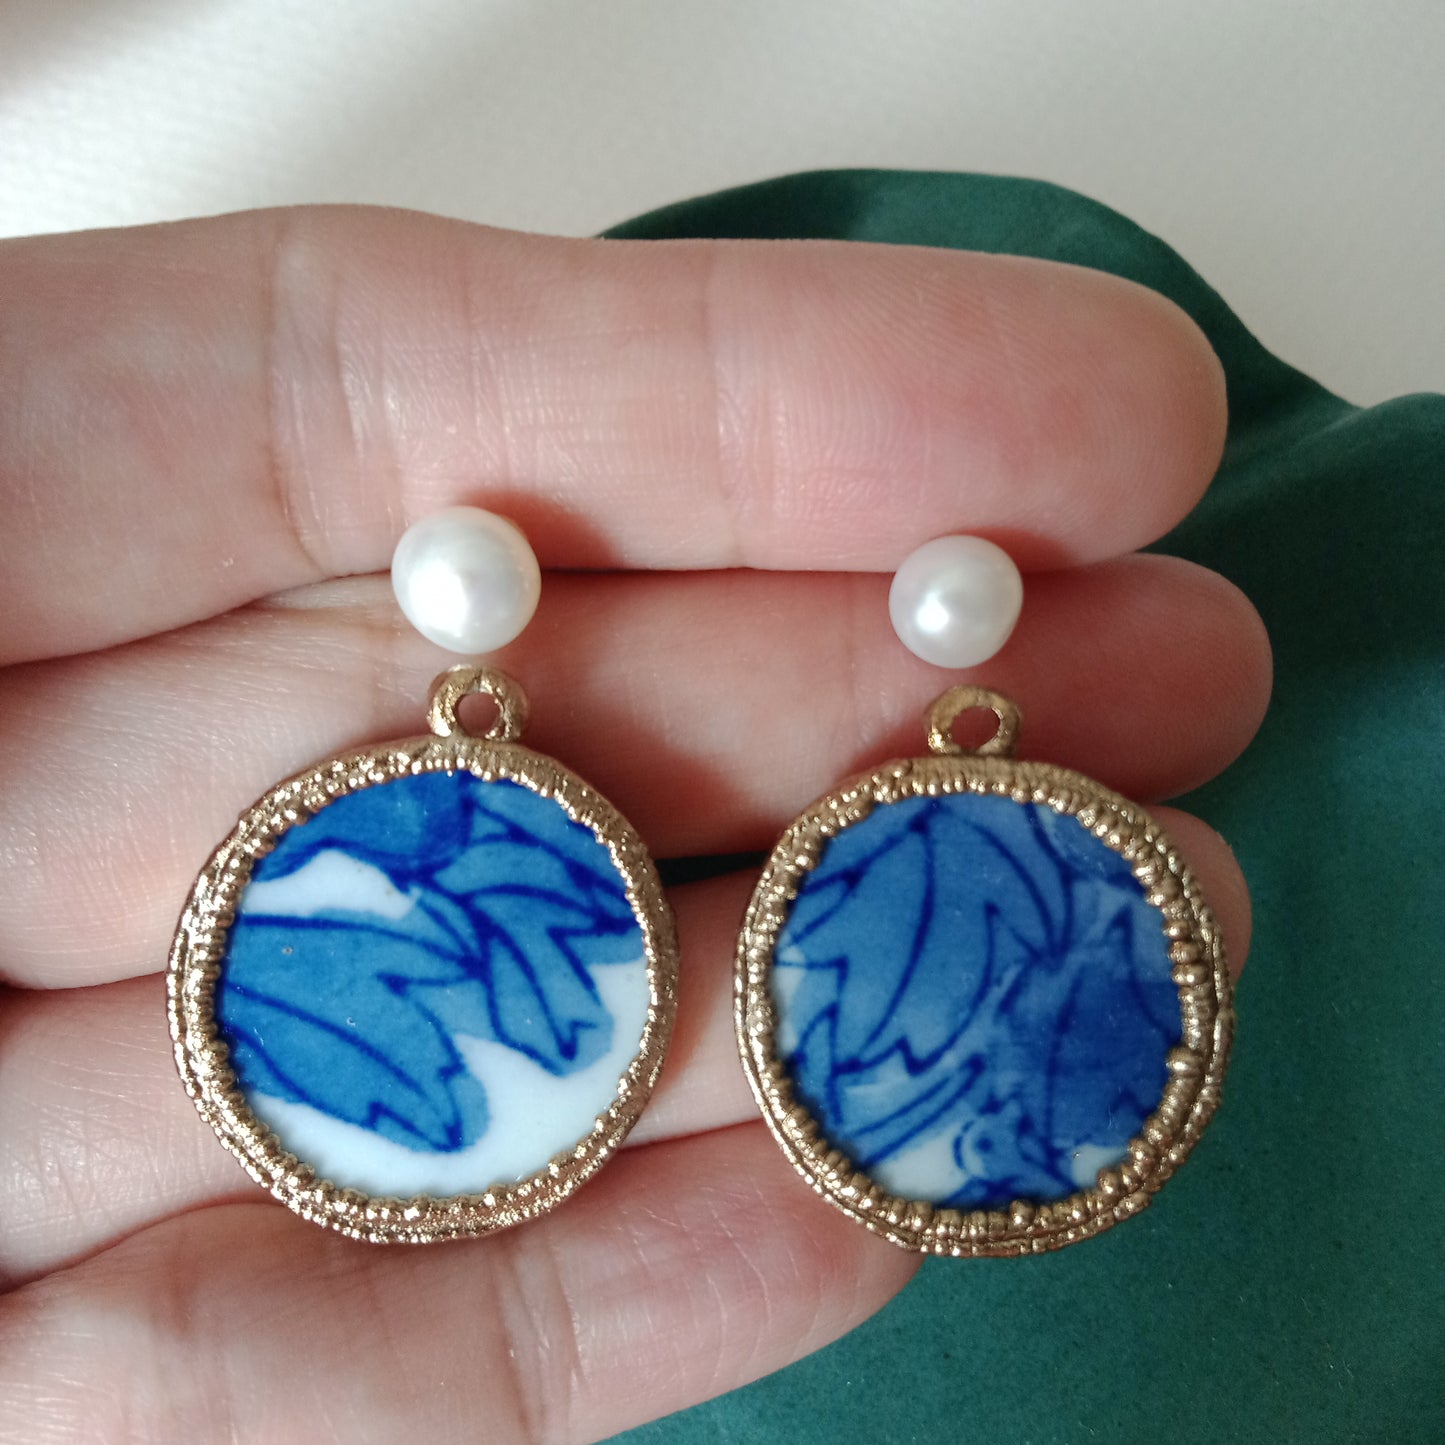 Blue and white porcelain FW pearl earrings - seconds